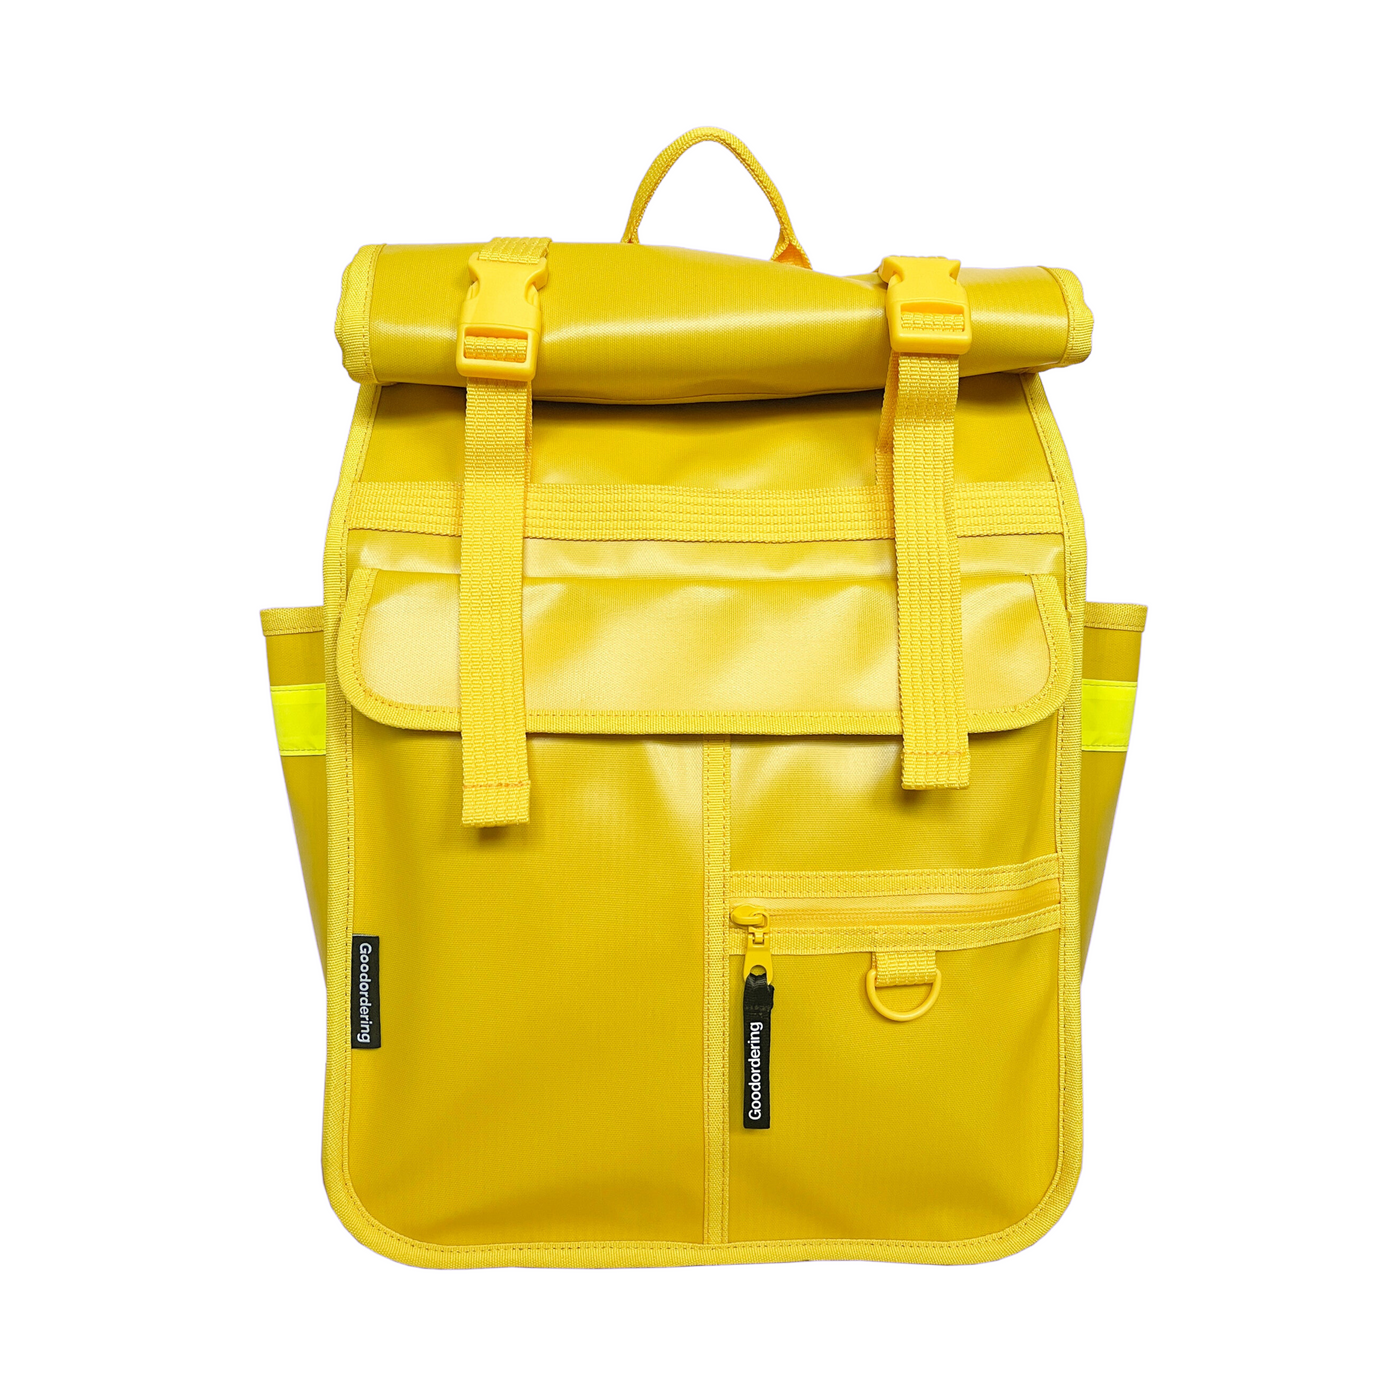 Goodordering Monochrome Rolltop Backpack Pannier Yellow - Radical Giving